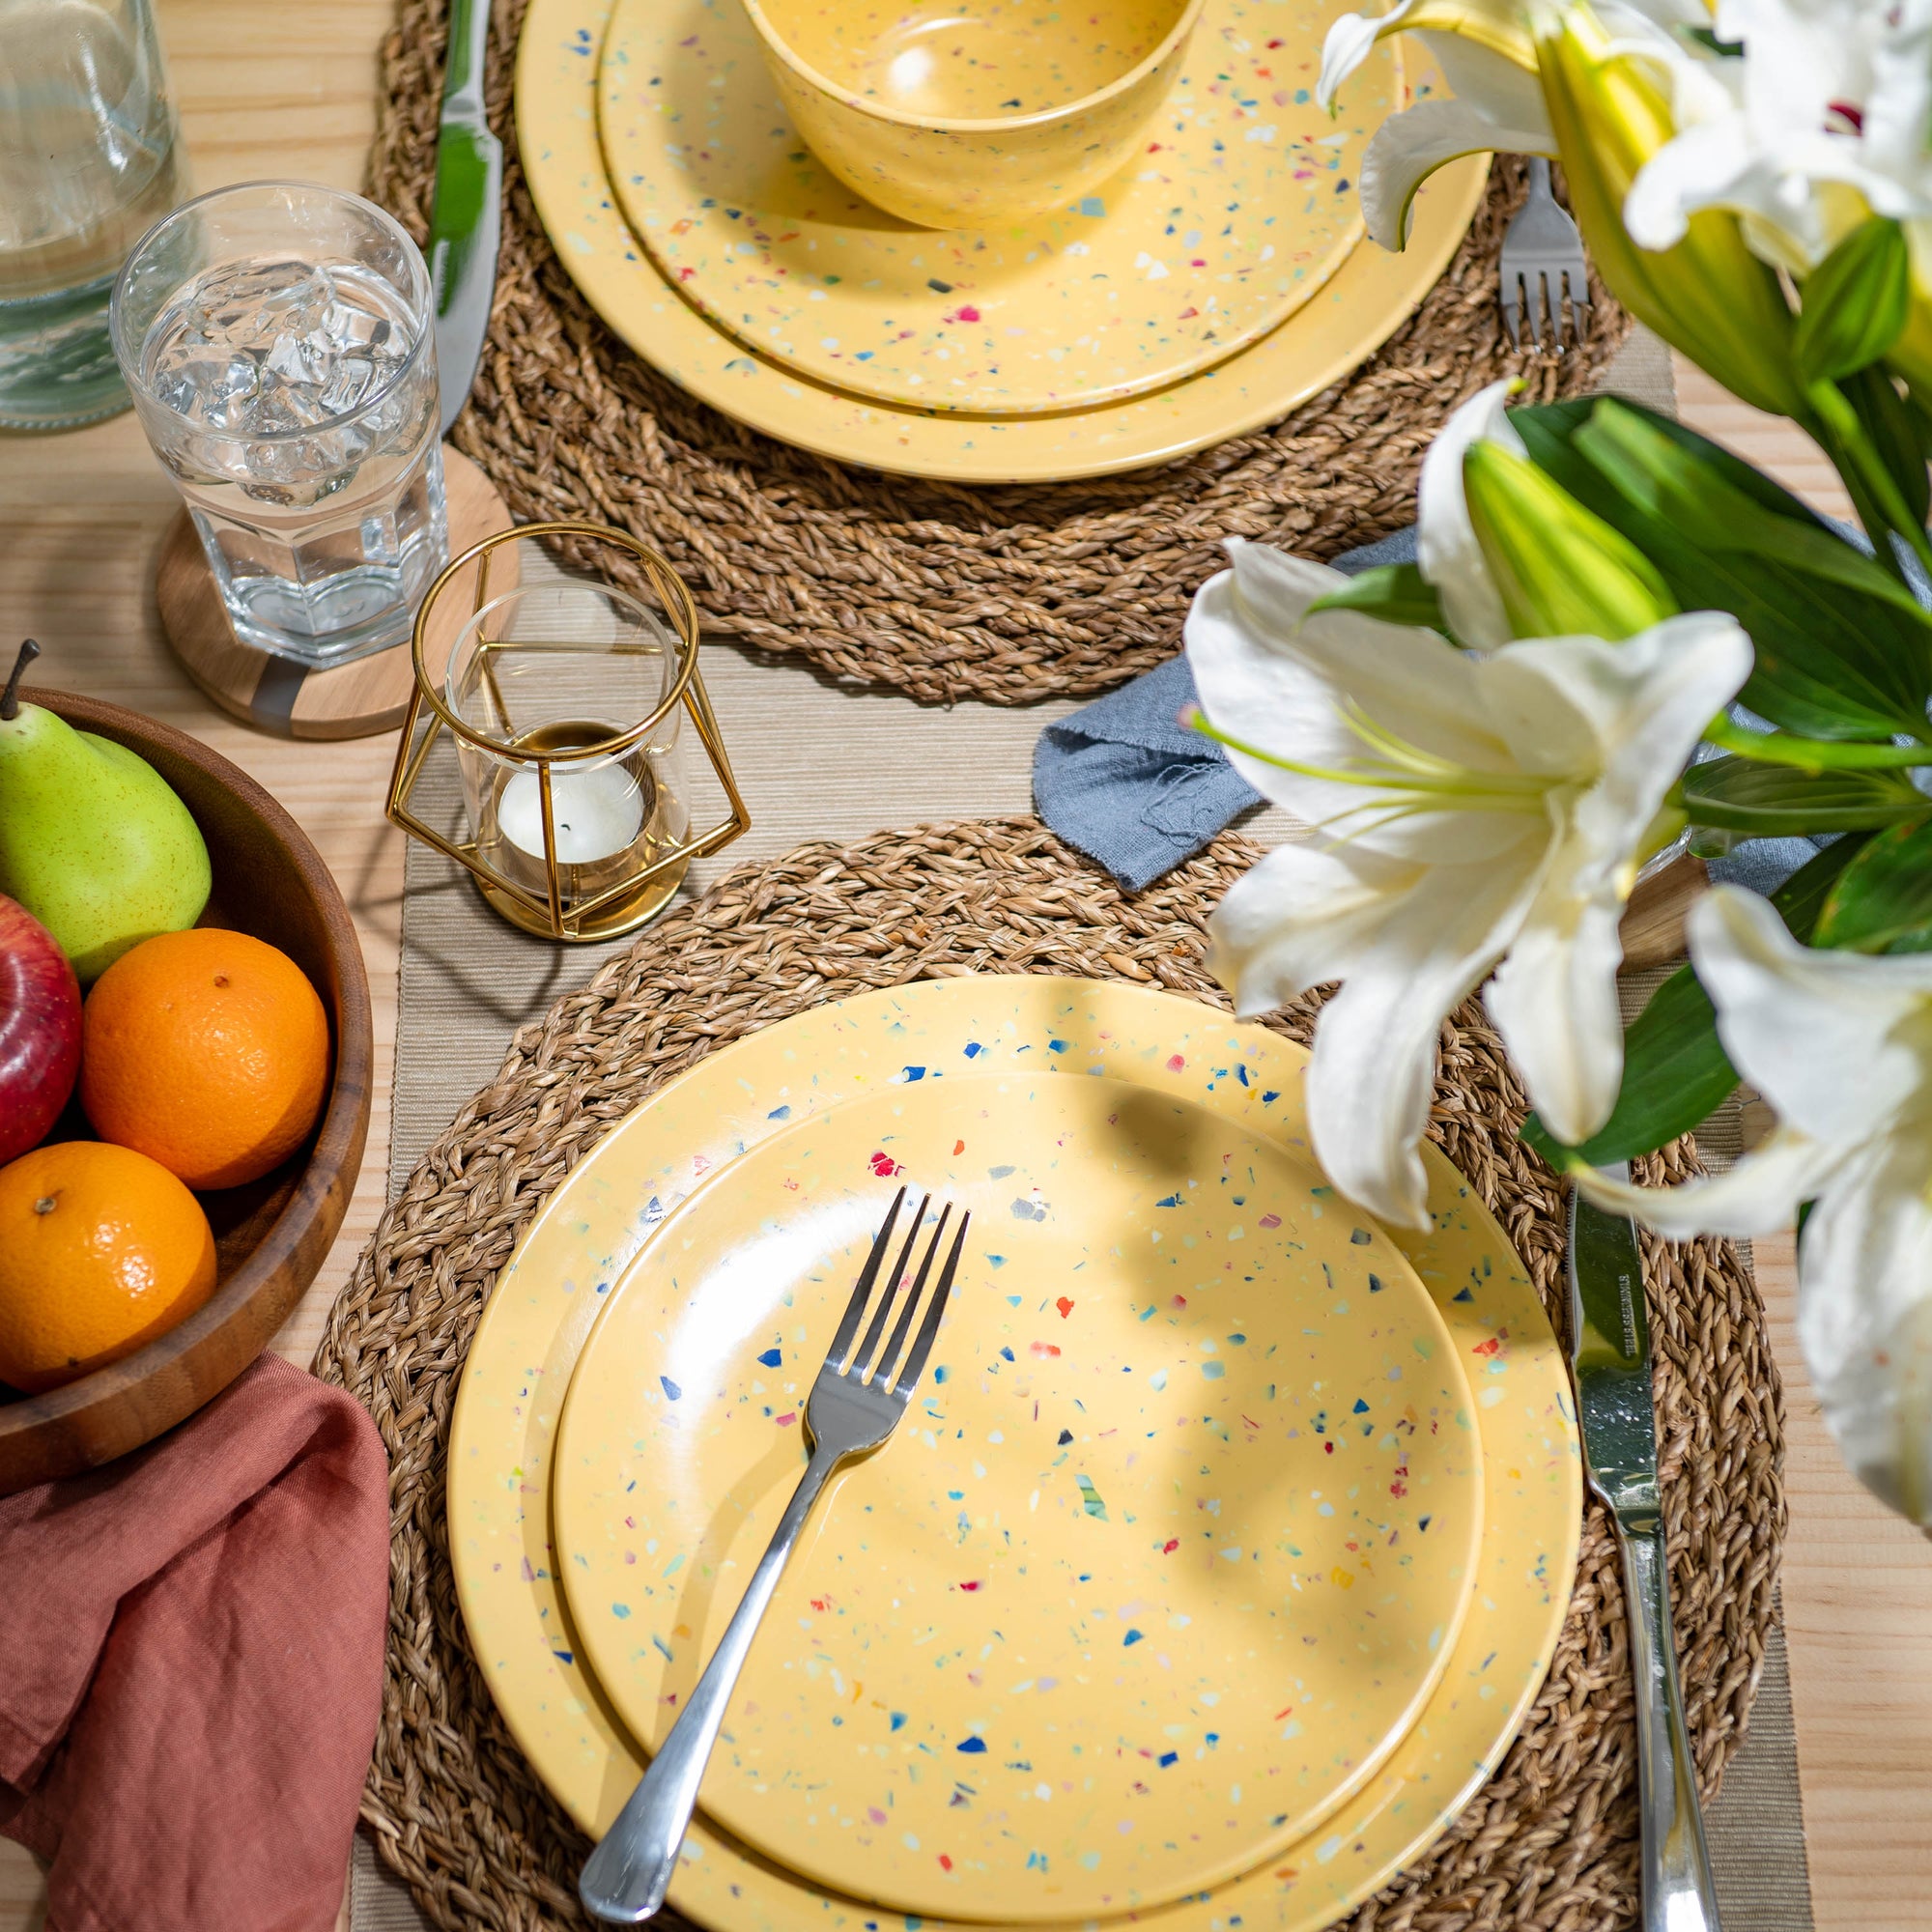 Confetti Melamine Dinnerware Set - Durable, Recycled Plates and Bowls, Yellow